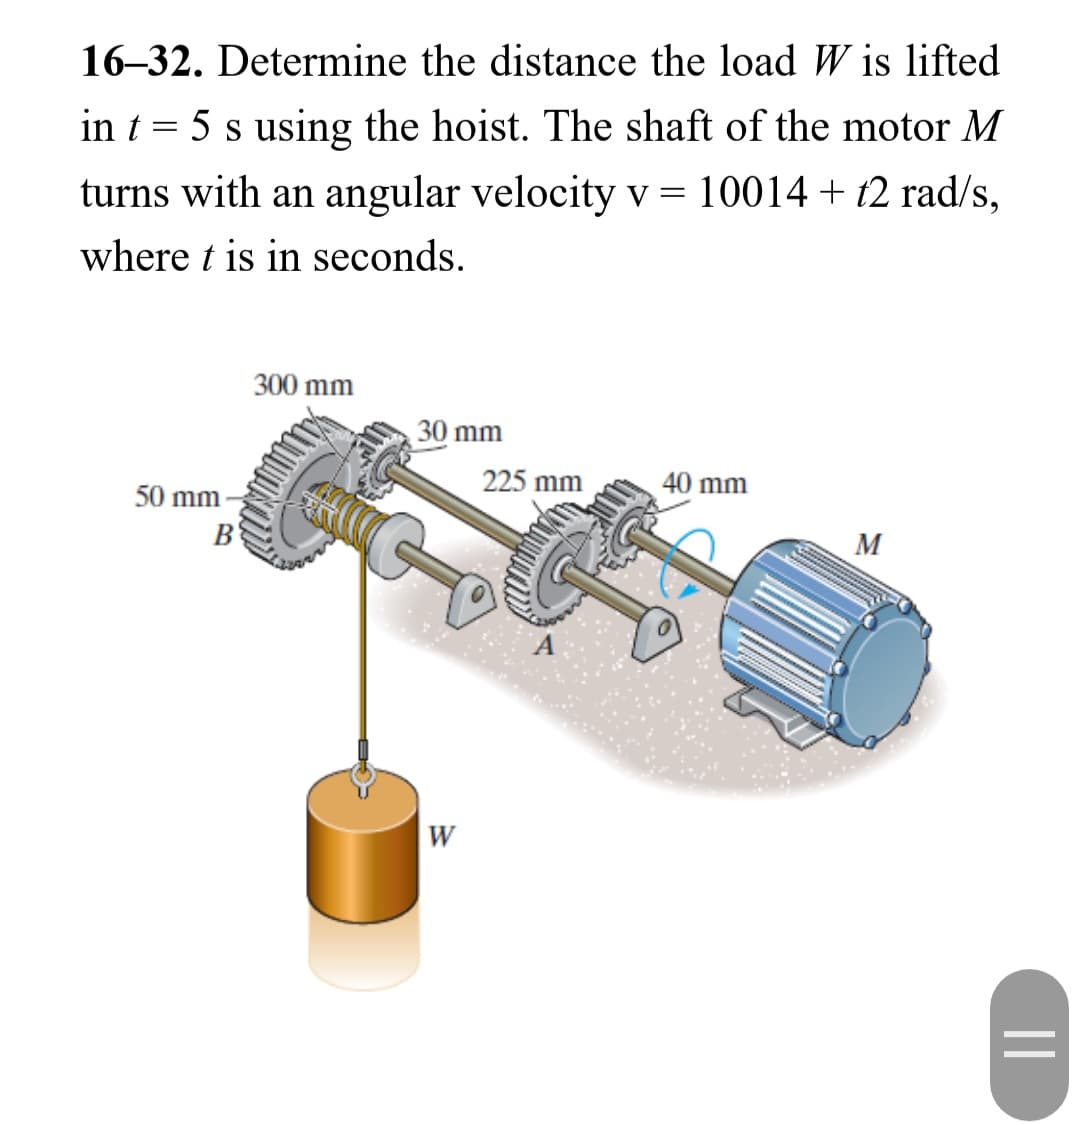 16-32. Determine the distance the load Wis lifted
in t = 5 s using the hoist. The shaft of the motor M
turns with an angular velocity v = 10014 + t2 rad/s,
where t is in seconds.
50 mm
B
300 mm
30 mm
W
225 mm
40 mm
M
||